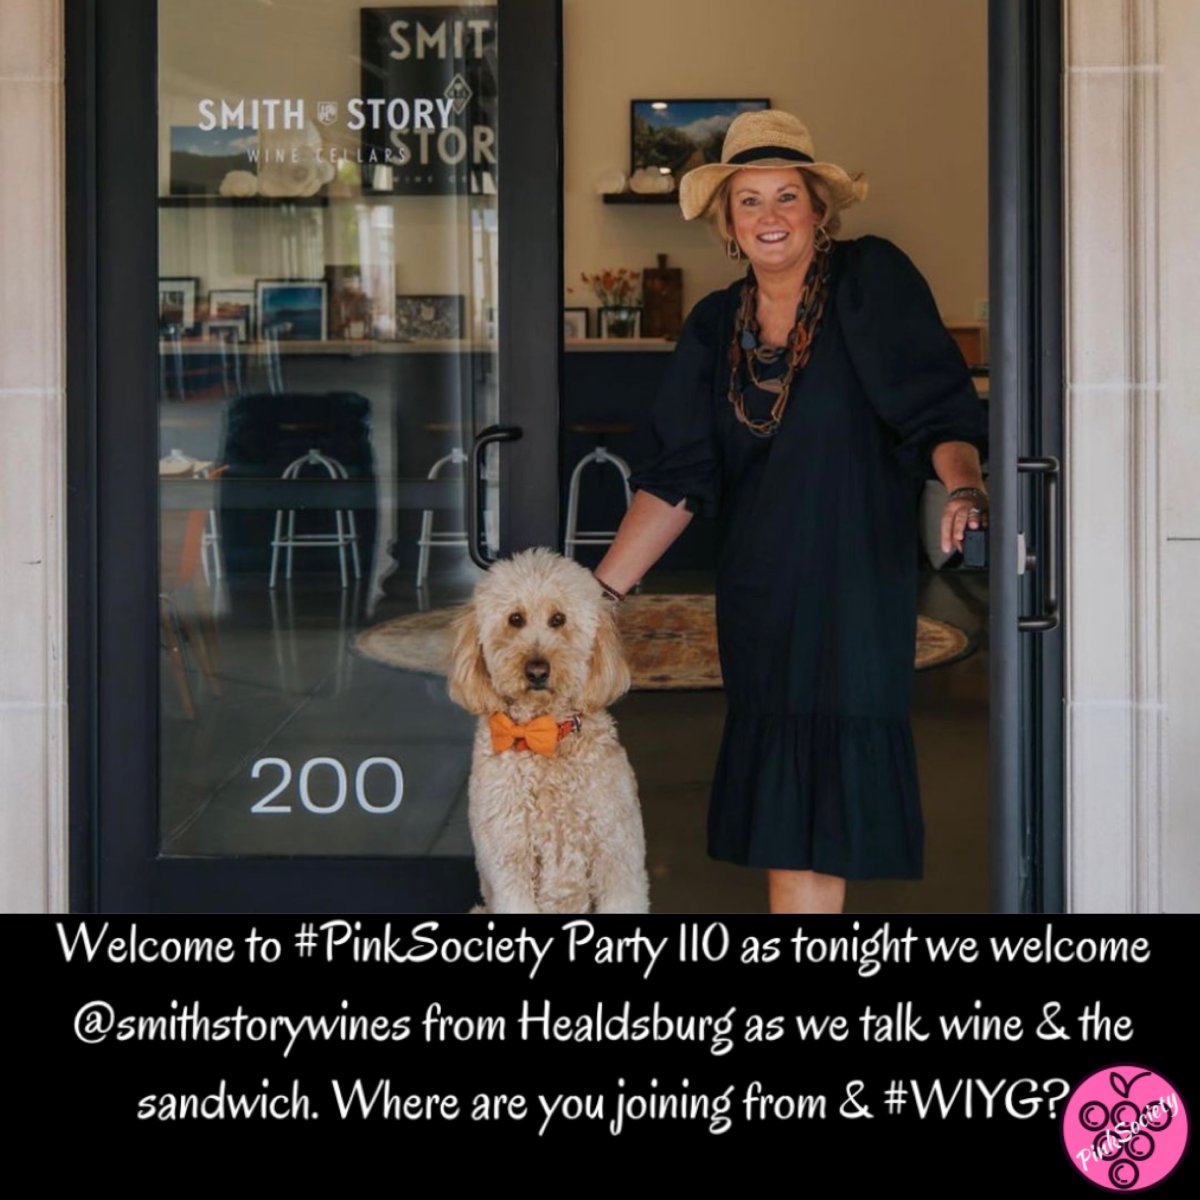 Welcome to #PinkSociety Party 110 as tonight we welcome @smithstorywines from Healdsburg as we talk wine & the sandwich. Where are you joining from & #WIYG? @boozychef @jflorez @_drazzari @smithstorywines